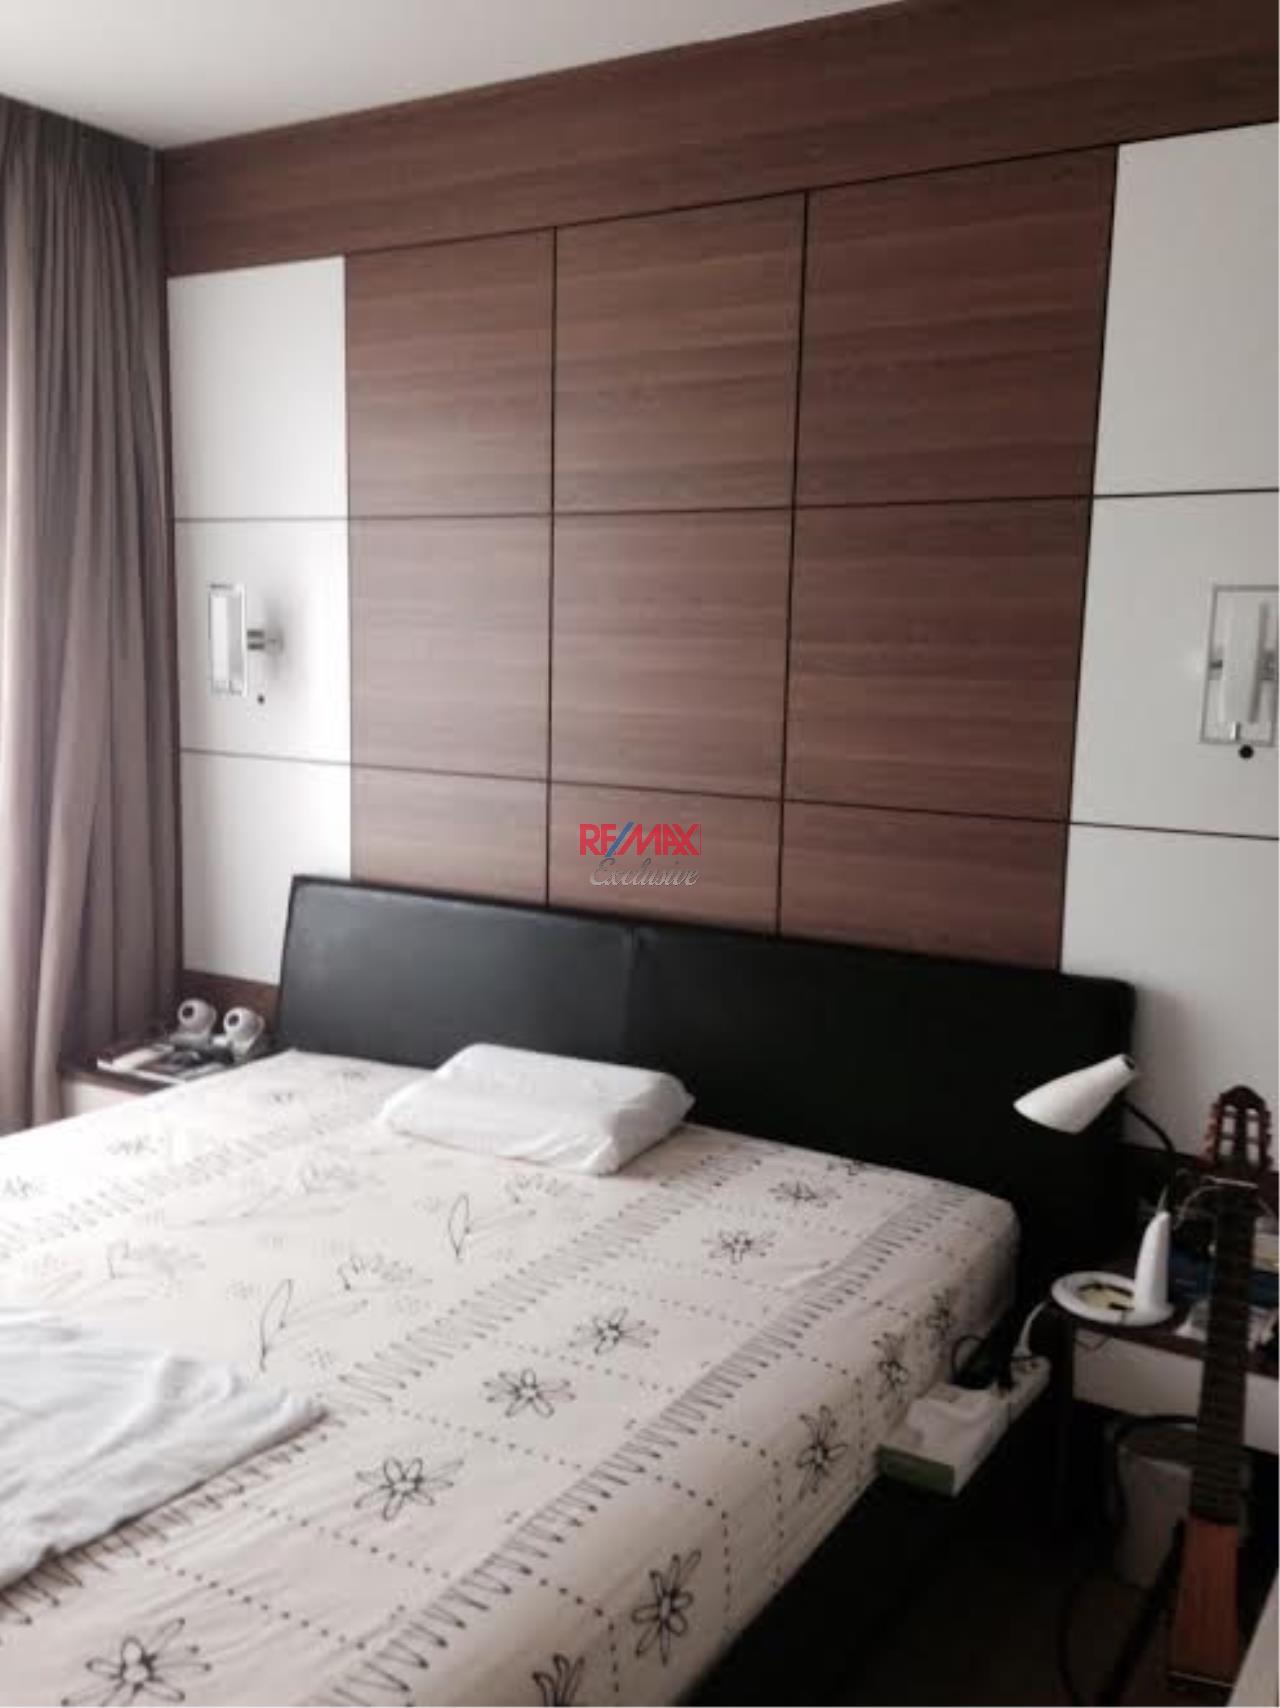 RE/MAX Exclusive Agency's Siri@Sukhumvit, 1 bedroom, 1 bathroom, Only For Sale 13,500,000 THB 2